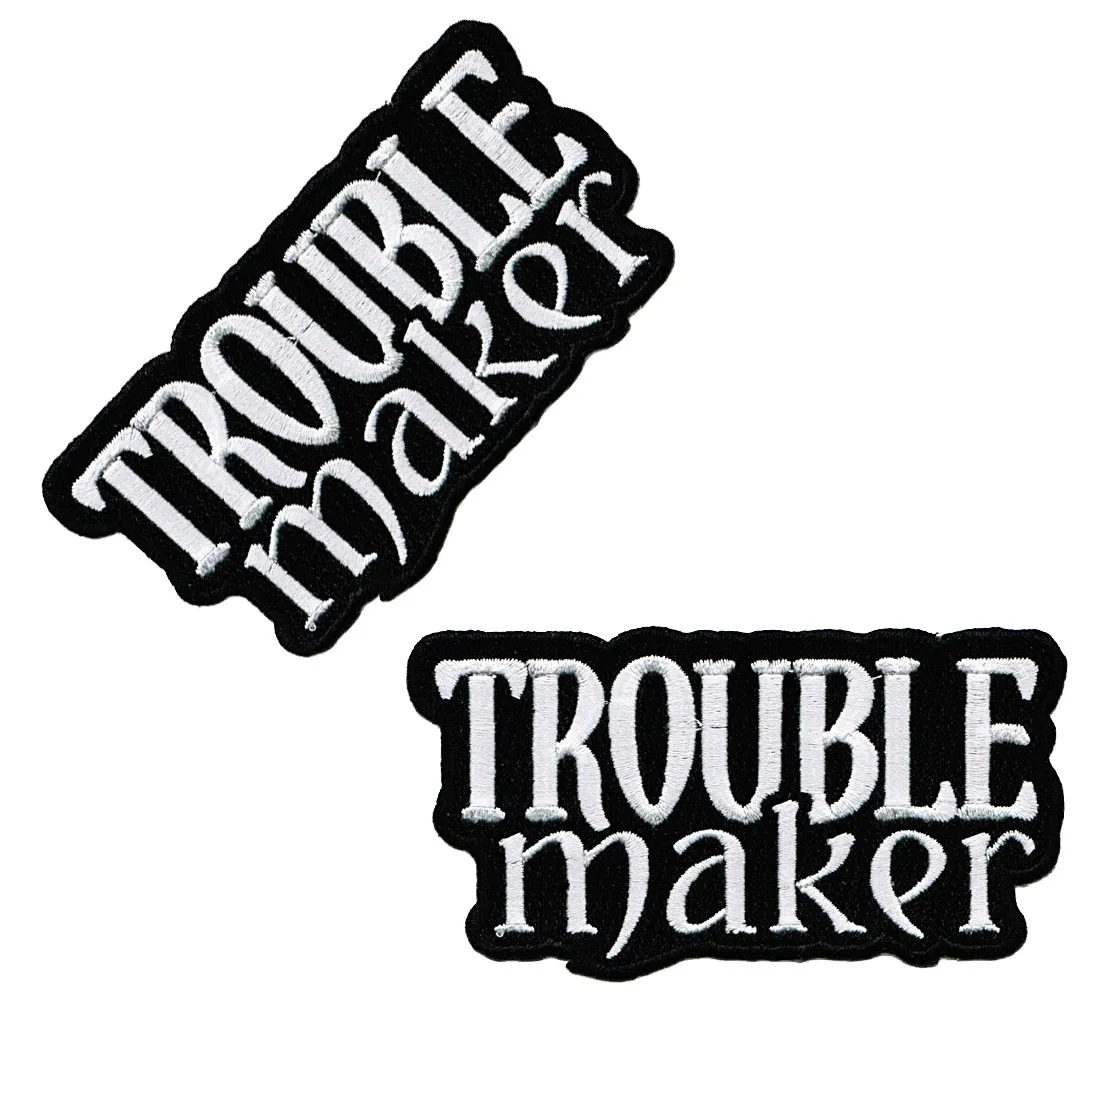 Custom The Cheap Low Price With Trouble Maker Patch Embroidered Rebel Iron-On Dangerous Logo 